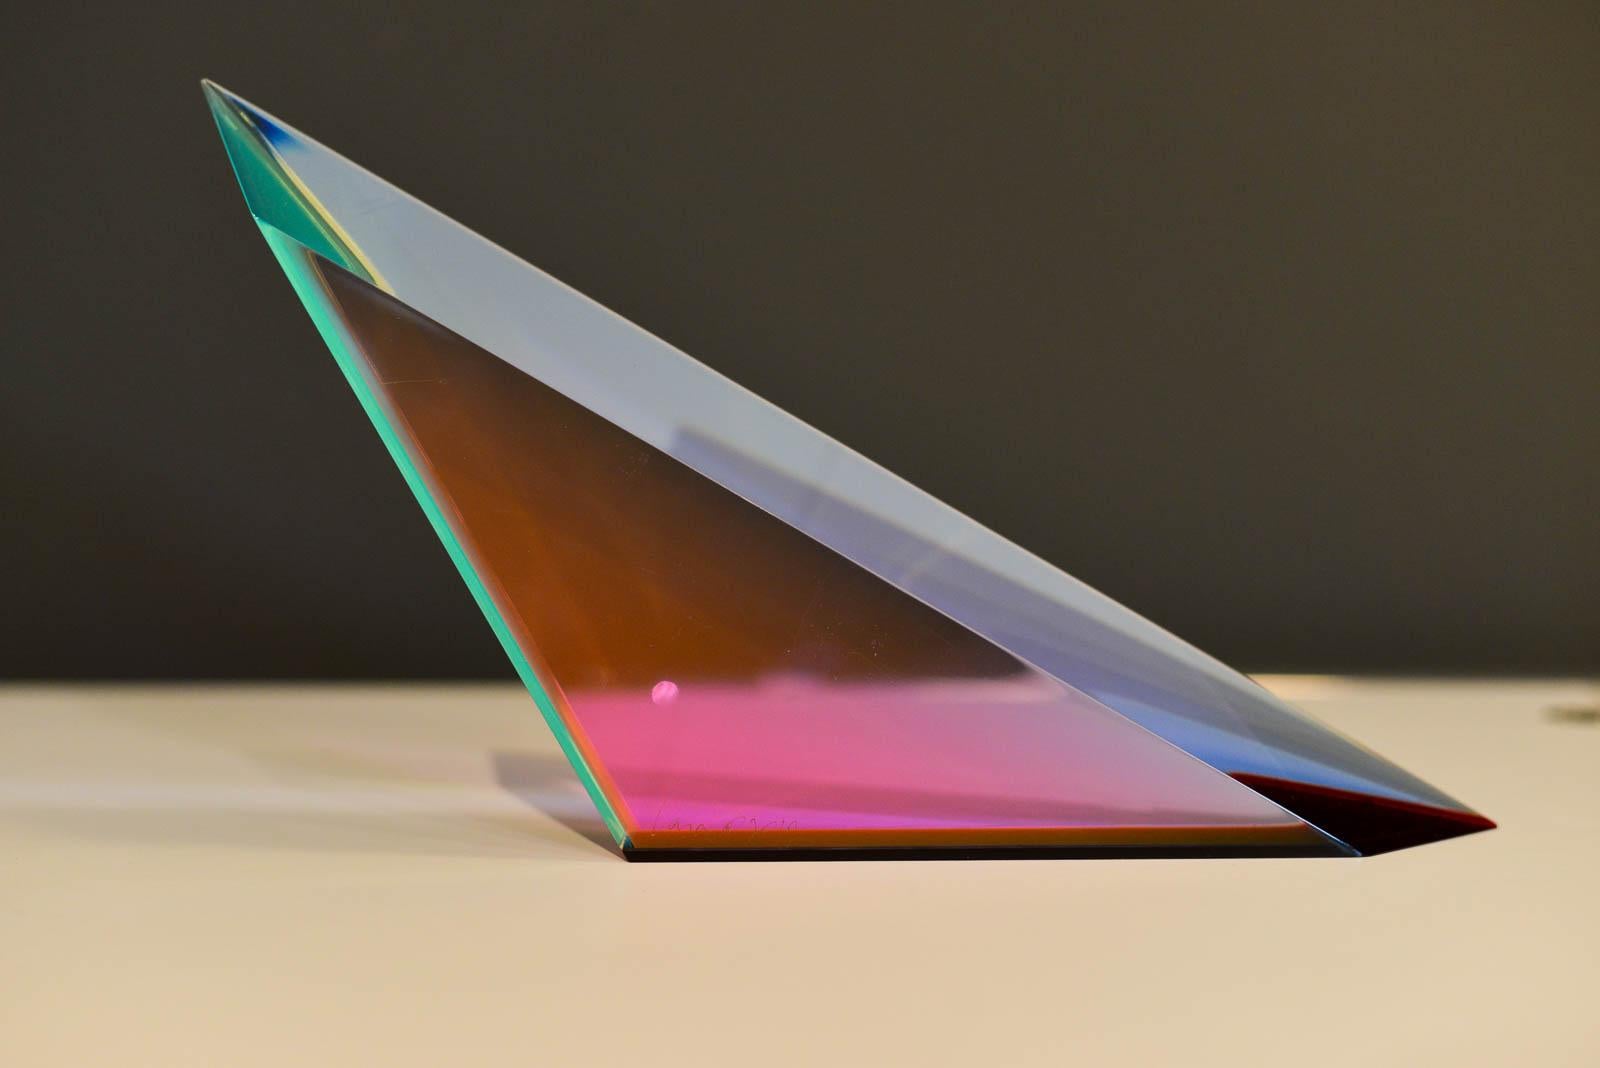 Vasa Velizar Mihich lucite triangle, 2012. Irregular shape colored lucite in very good condition signed and dated 2012. Includes catalog from Palm Springs Desert Museum, 1980

Measures 14